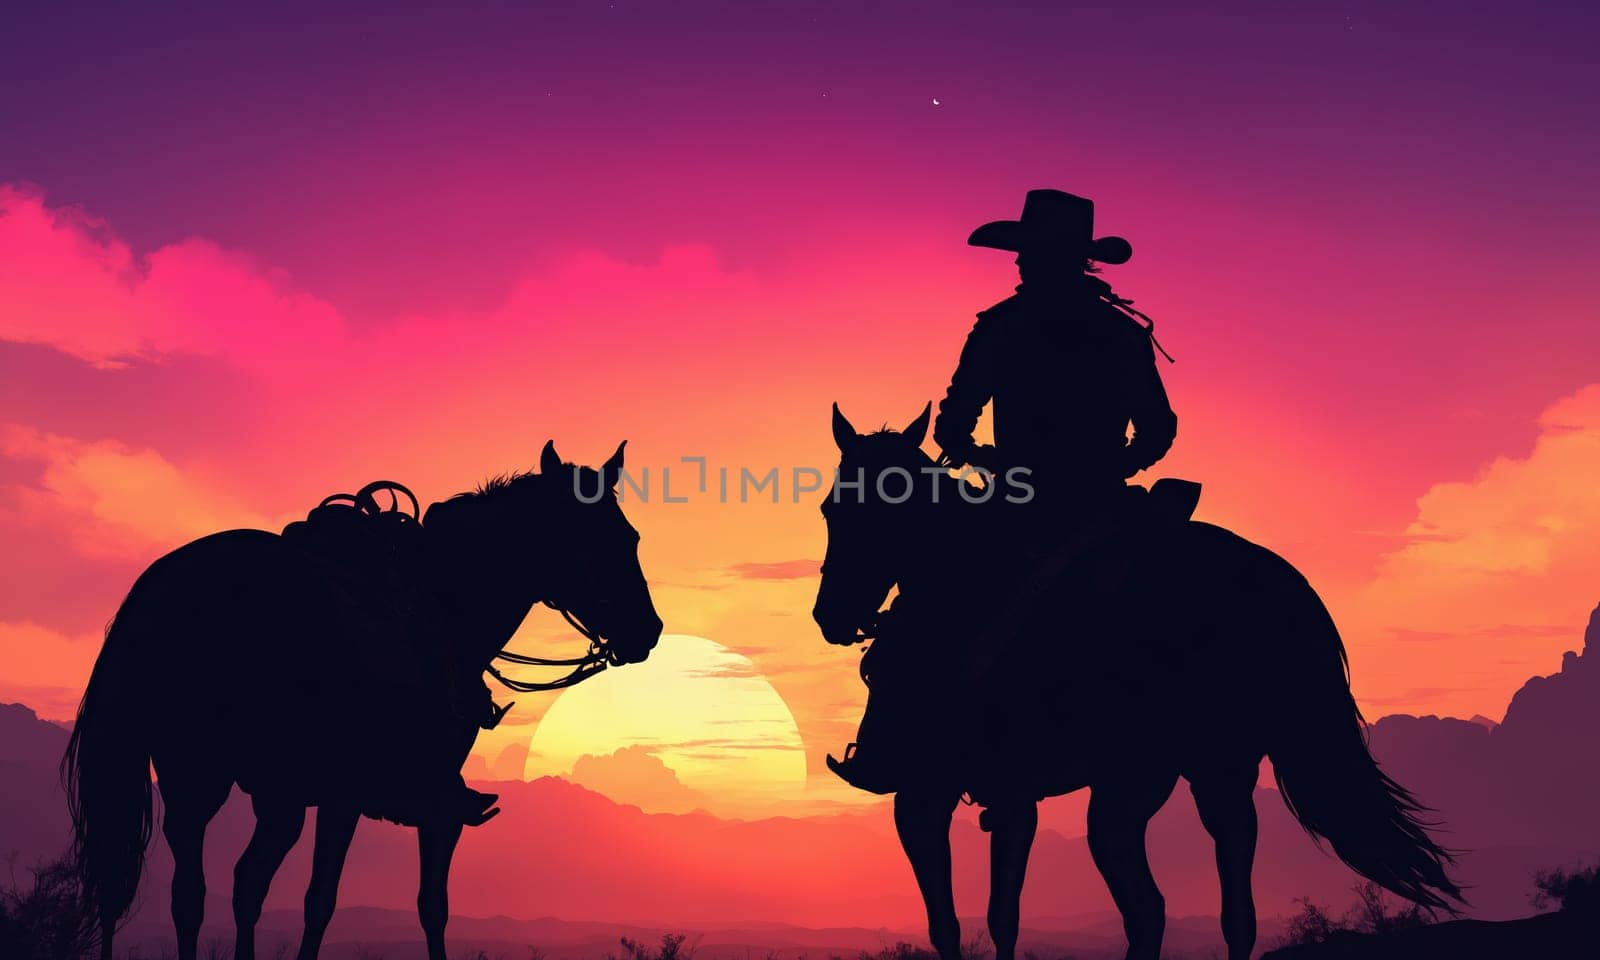 Two cowboys on horses ride in the desert at dusk, under a colorful sky by Andre1ns